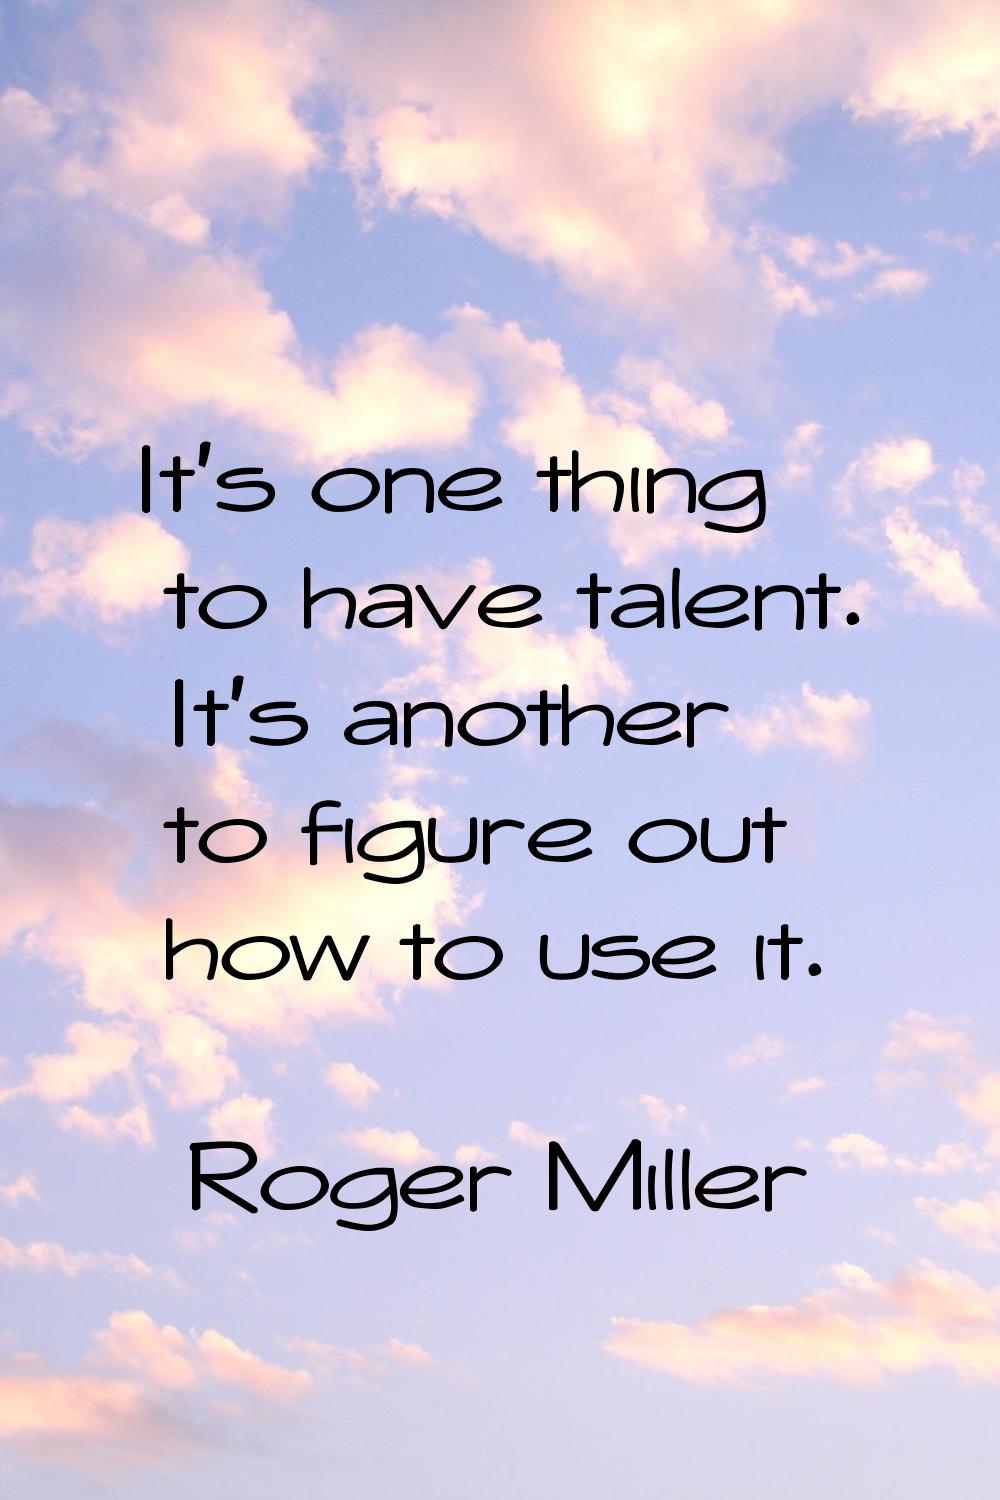 It's one thing to have talent. It's another to figure out how to use it.